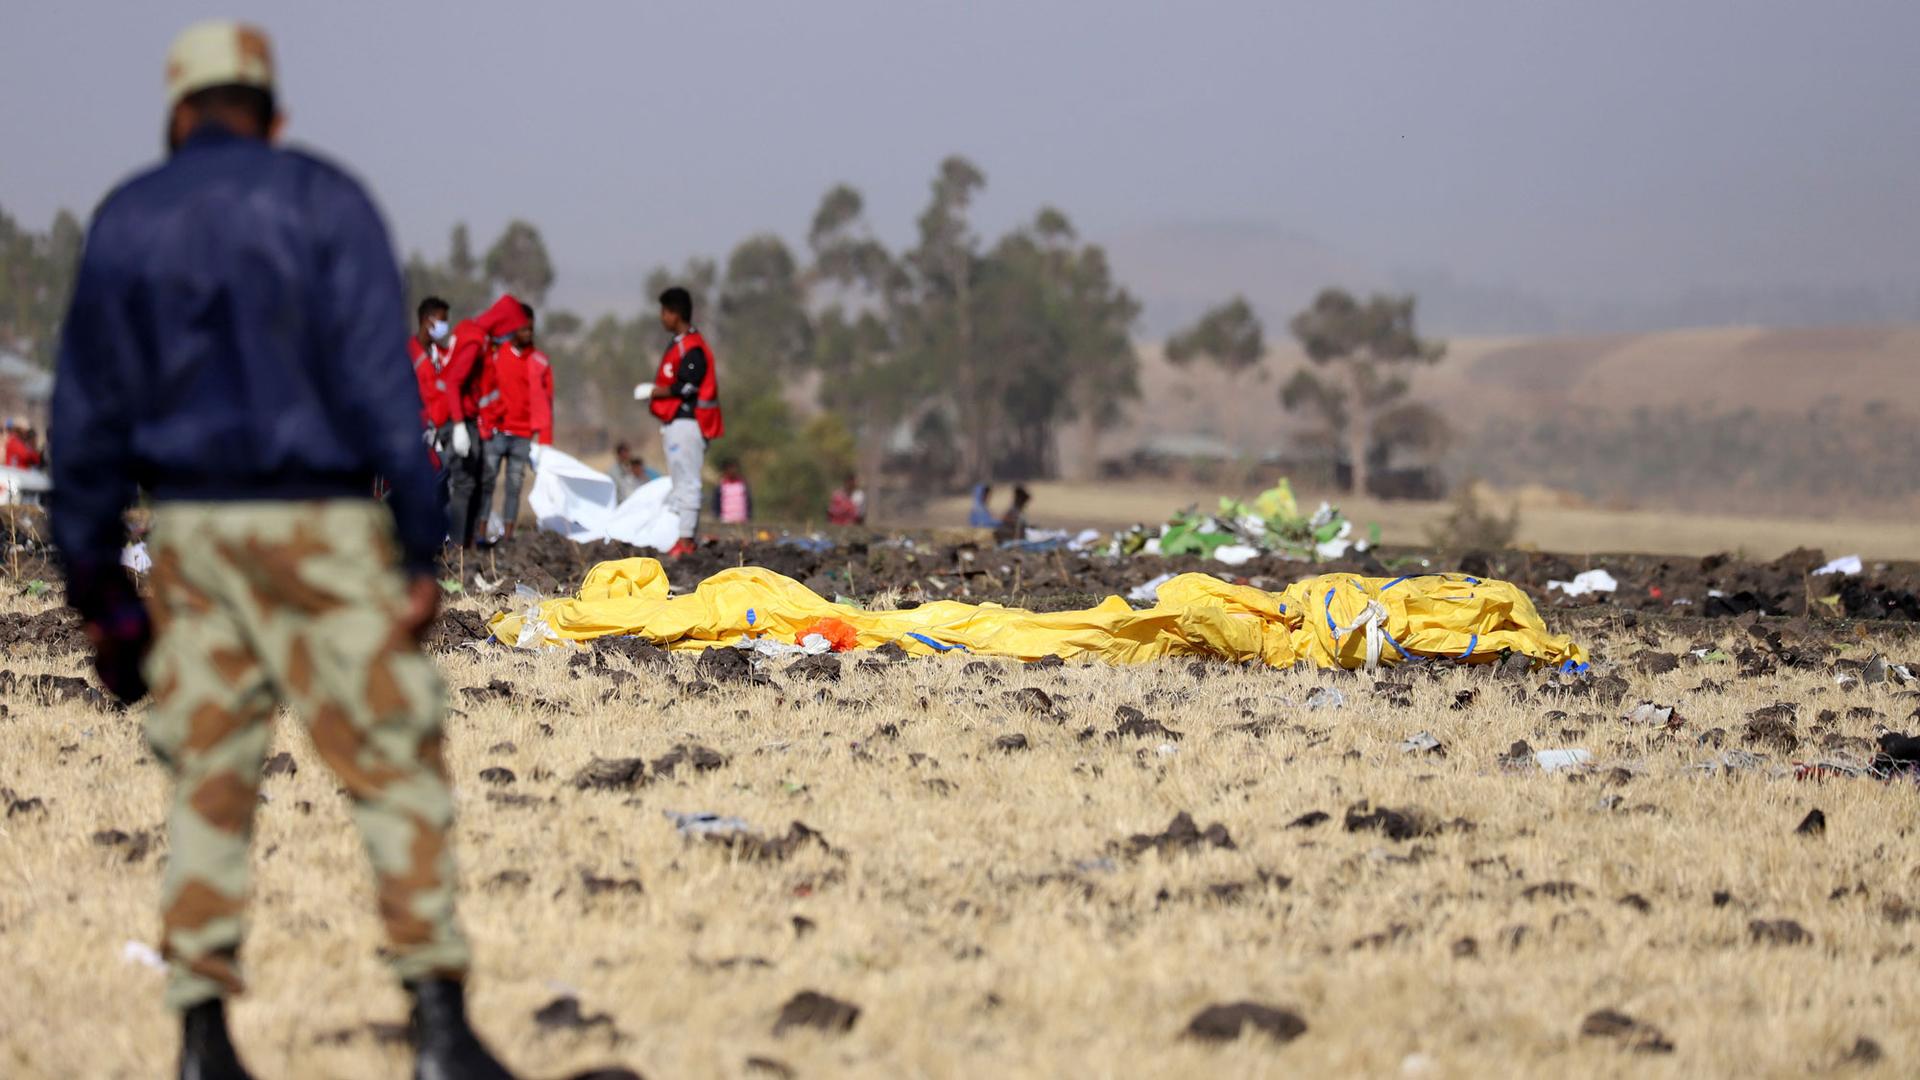 Members of the search and rescue mission are shown on the scene of the Ethiopian Airlines Flight ET 302 plane crash with a large yellow object in the middle of the photo.